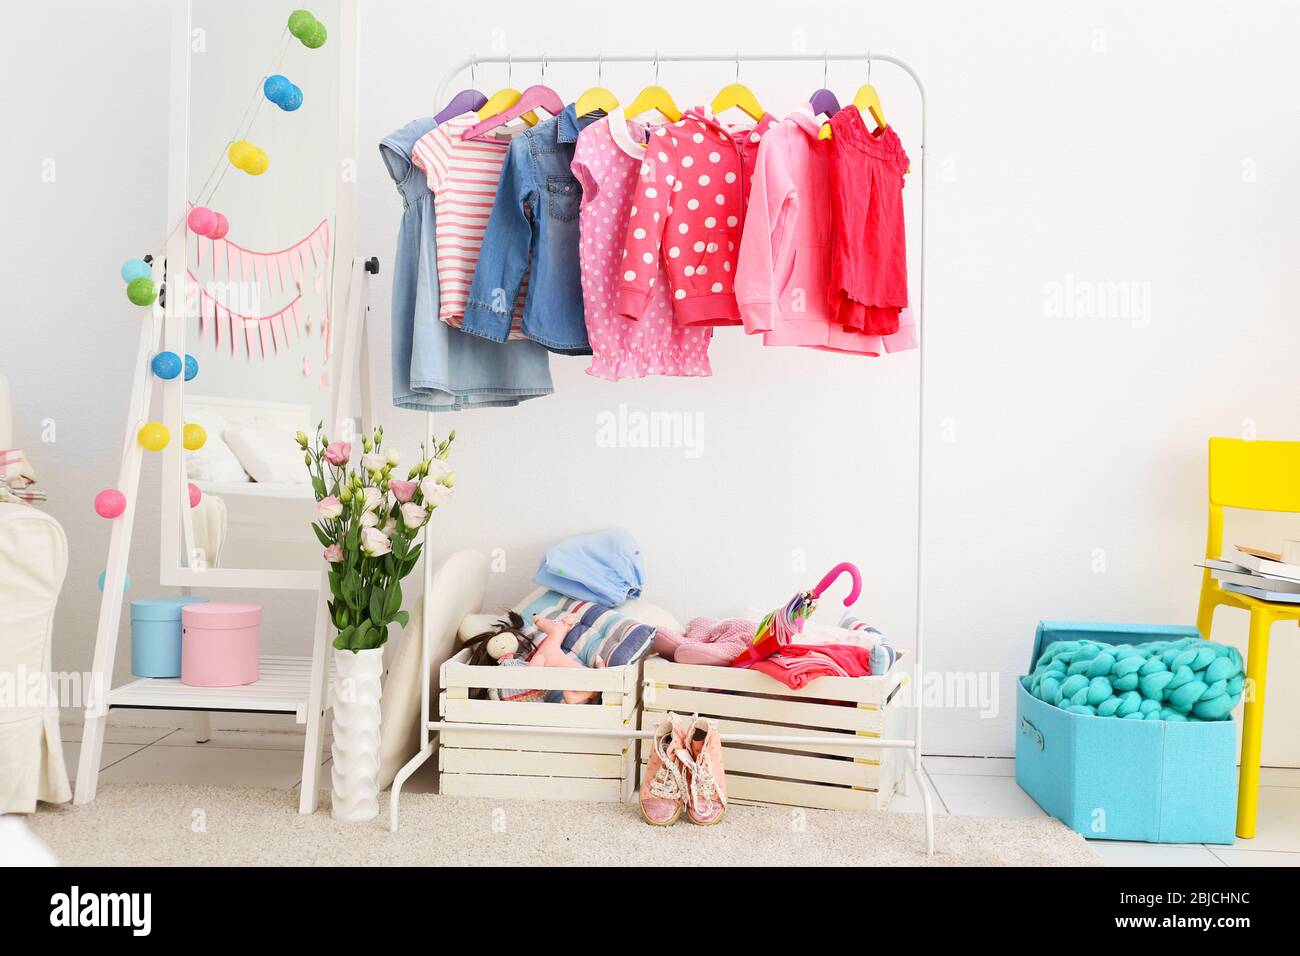 Children clothing on hanger stand in dressing room Stock Photo